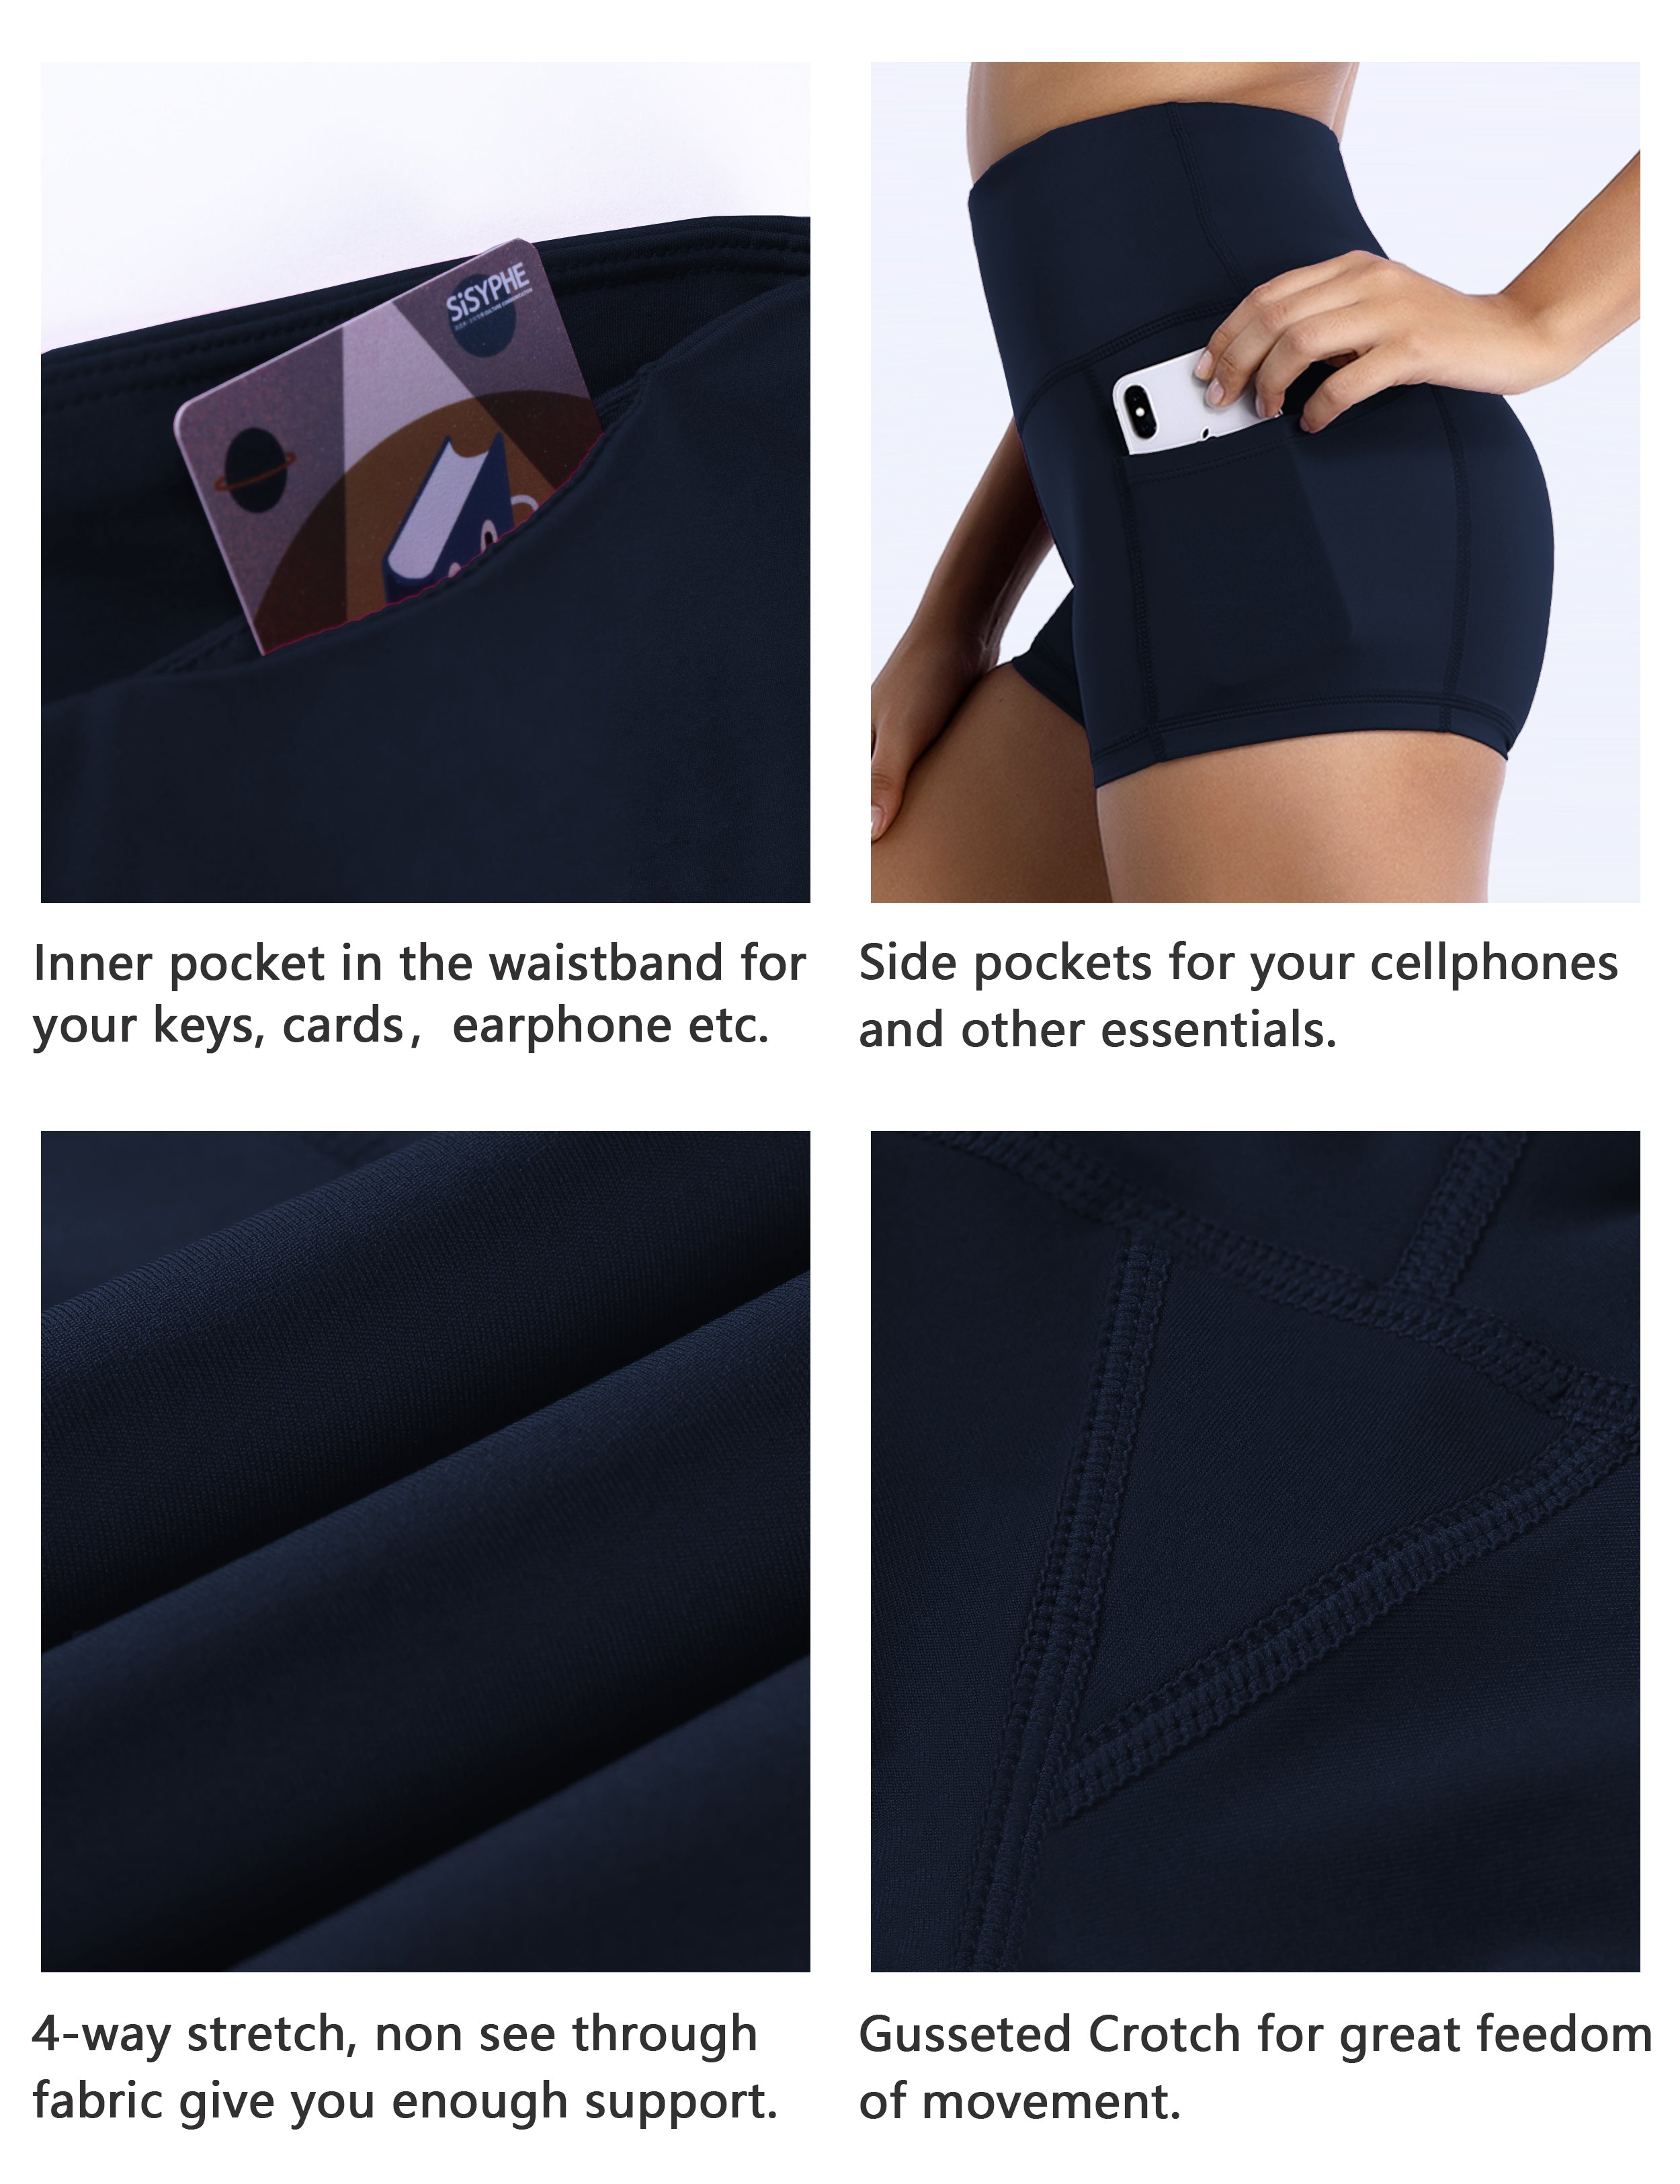 2.5" Side Pockets Yoga Shorts darknavy Sleek, soft, smooth and totally comfortable: our newest sexy style is here. Softest-ever fabric High elasticity High density 4-way stretch Fabric doesn't attract lint easily No see-through Moisture-wicking Machine wash 78% Polyester, 22% Spandex